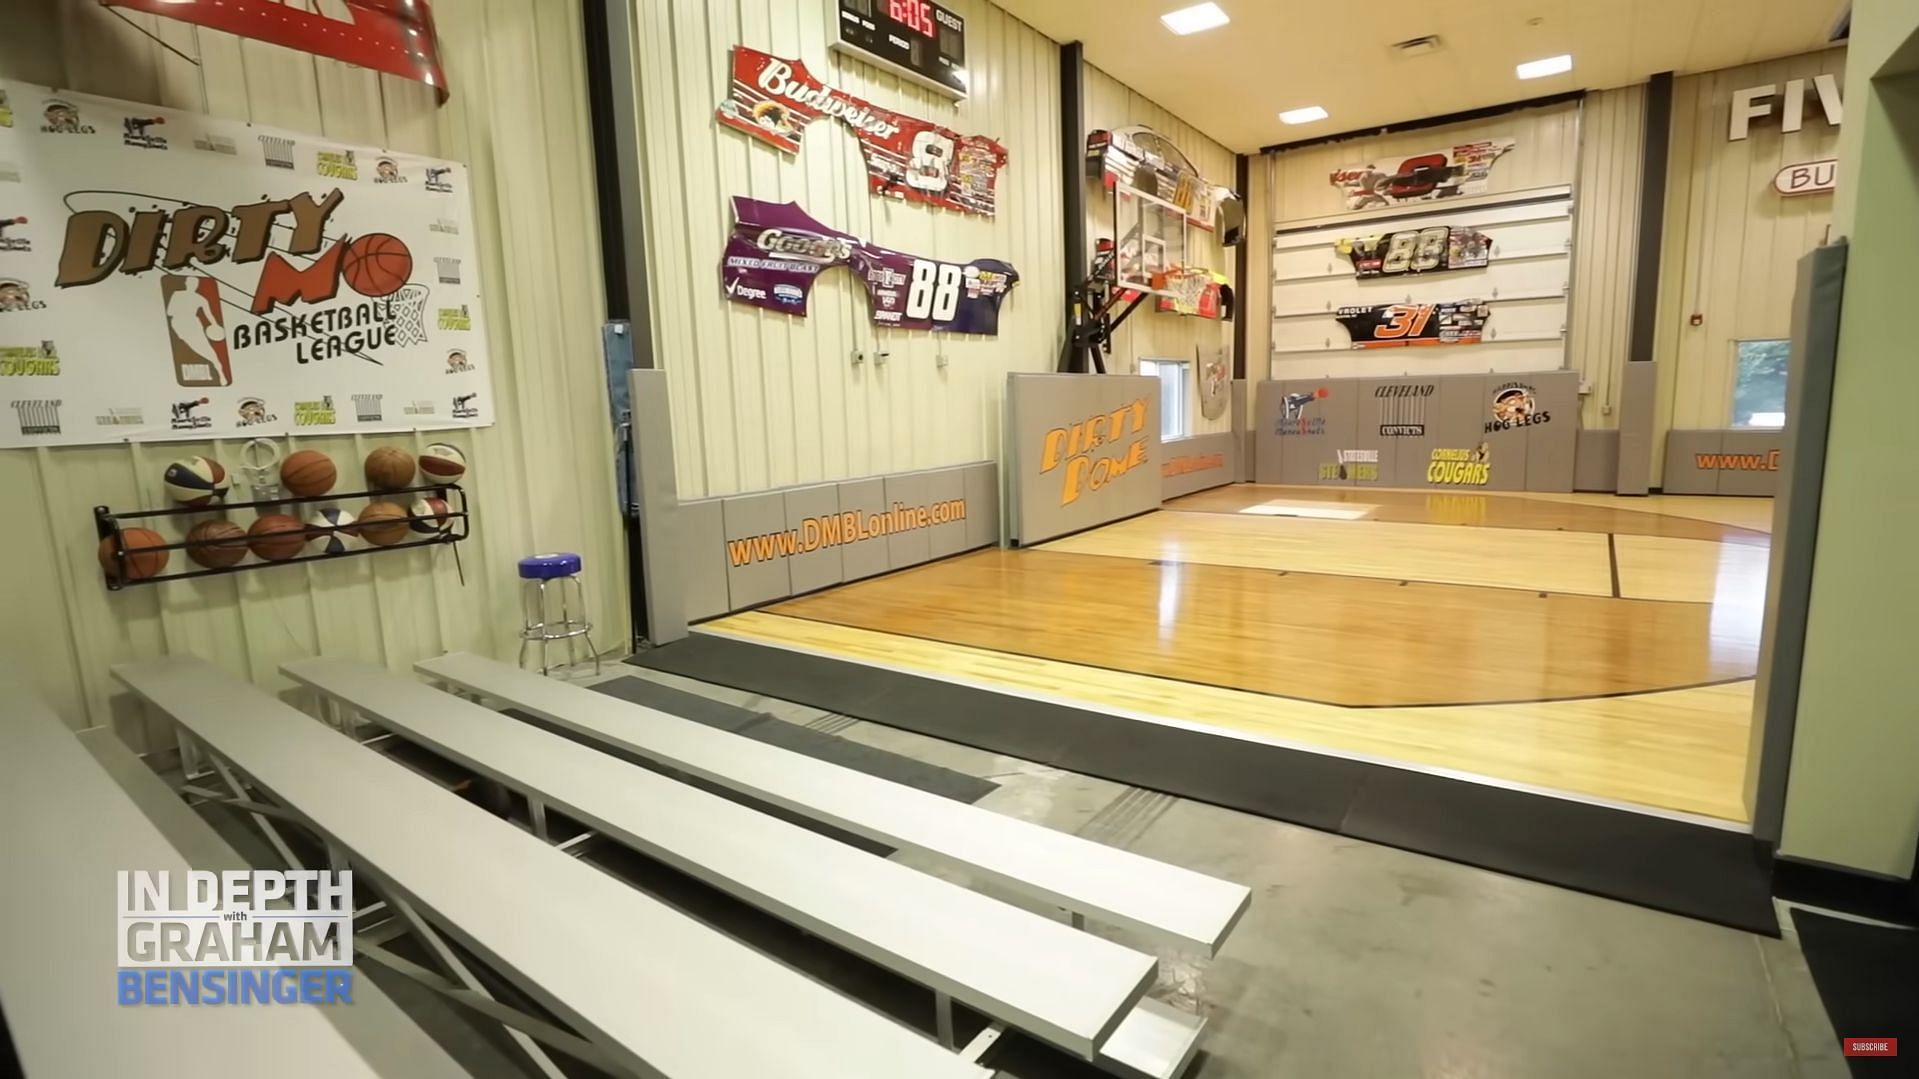 A view of the half basketball court and the used car fenders (Graham Bensinger on YouTube)